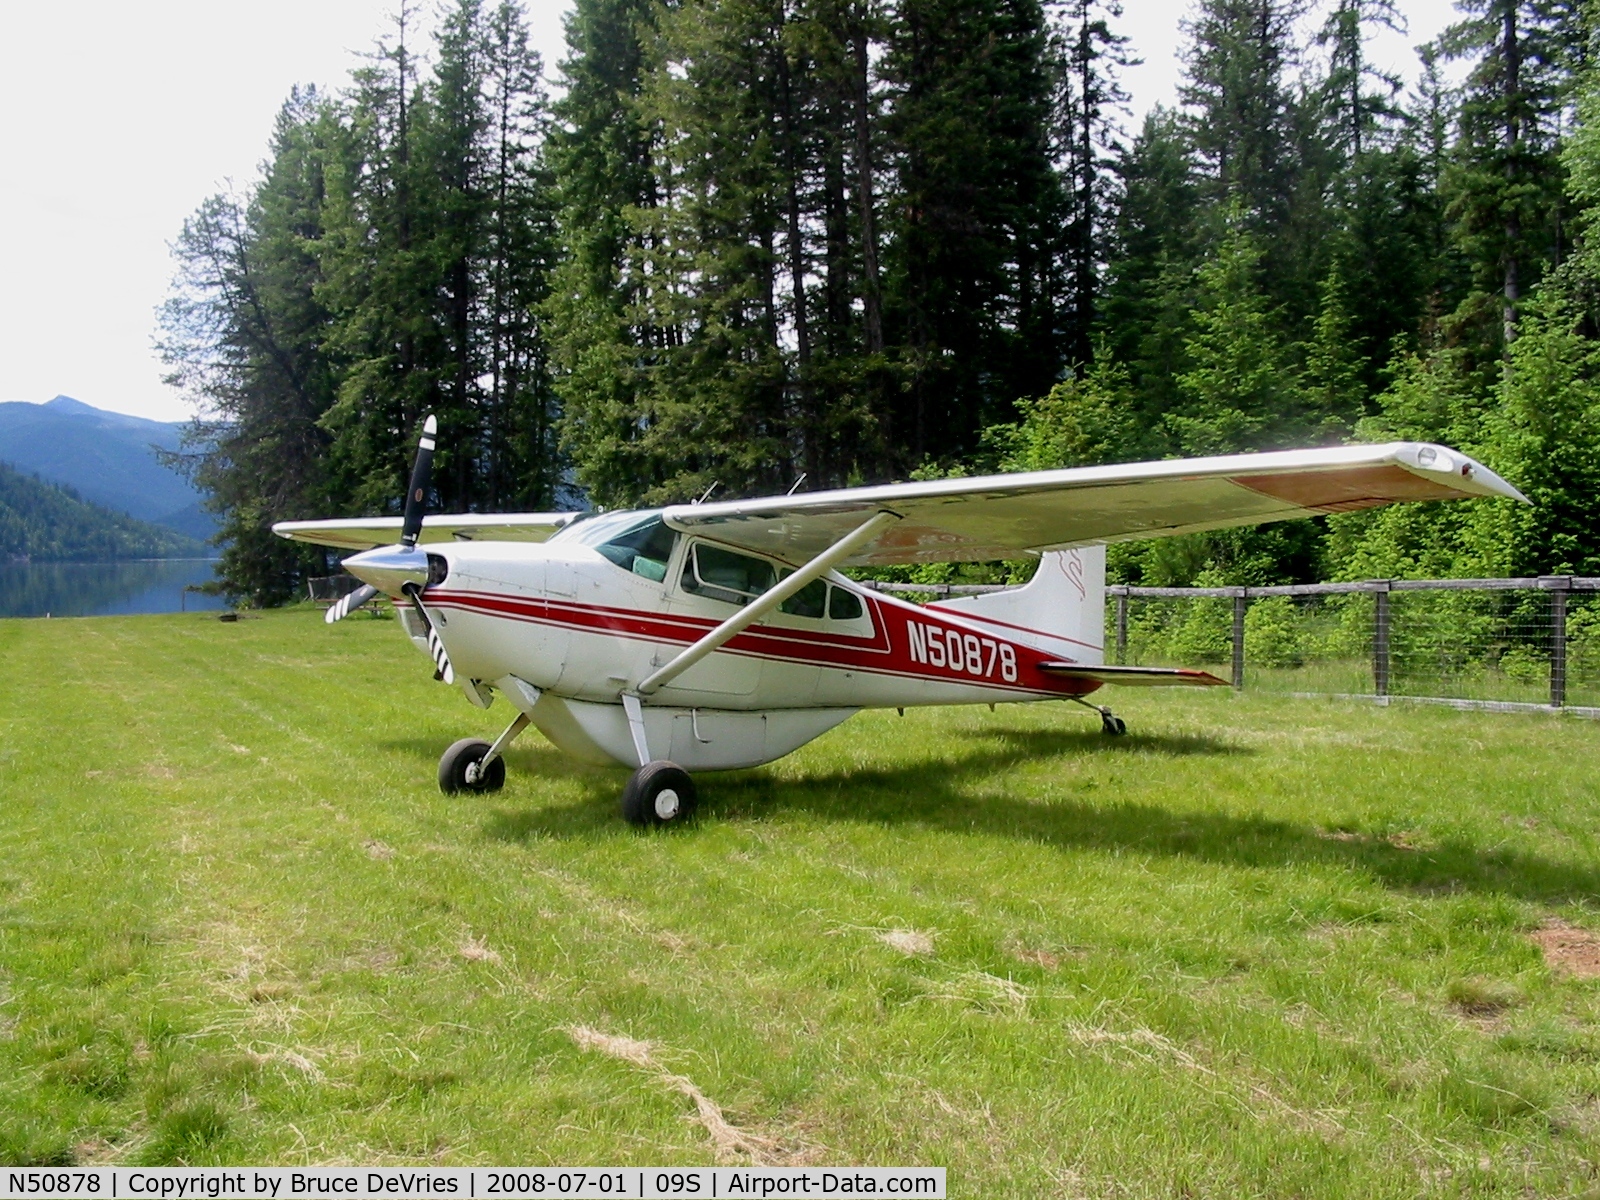 N50878, 1980 Cessna A185F Skywagon 185 C/N 18504060, wonderful aircraft, very successful in 3 years of mountain and unimproved airstrip instruction, based in Spokane, WA, Felts Field.